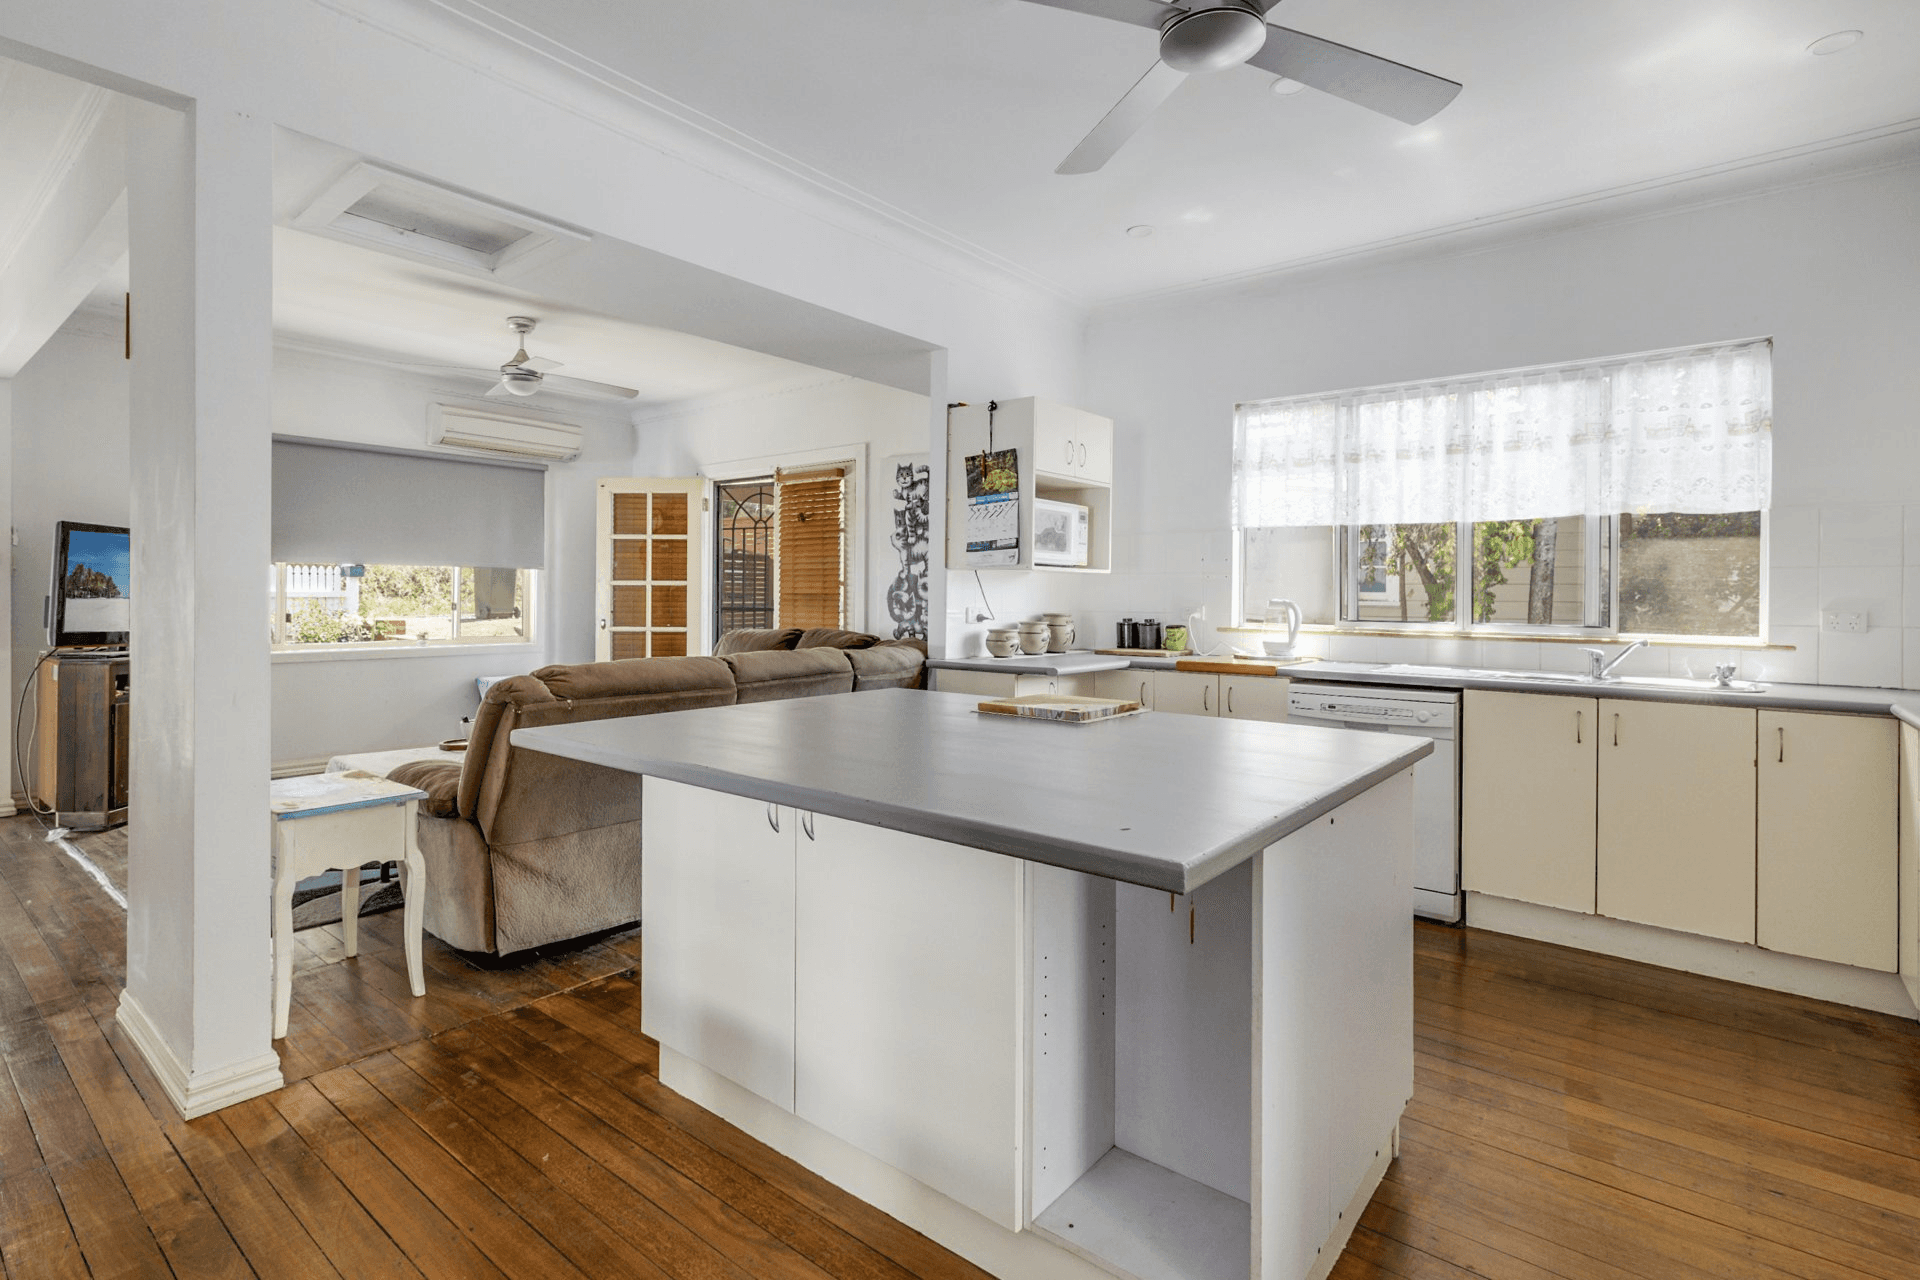 57 Lord Street, East Kempsey, NSW 2440